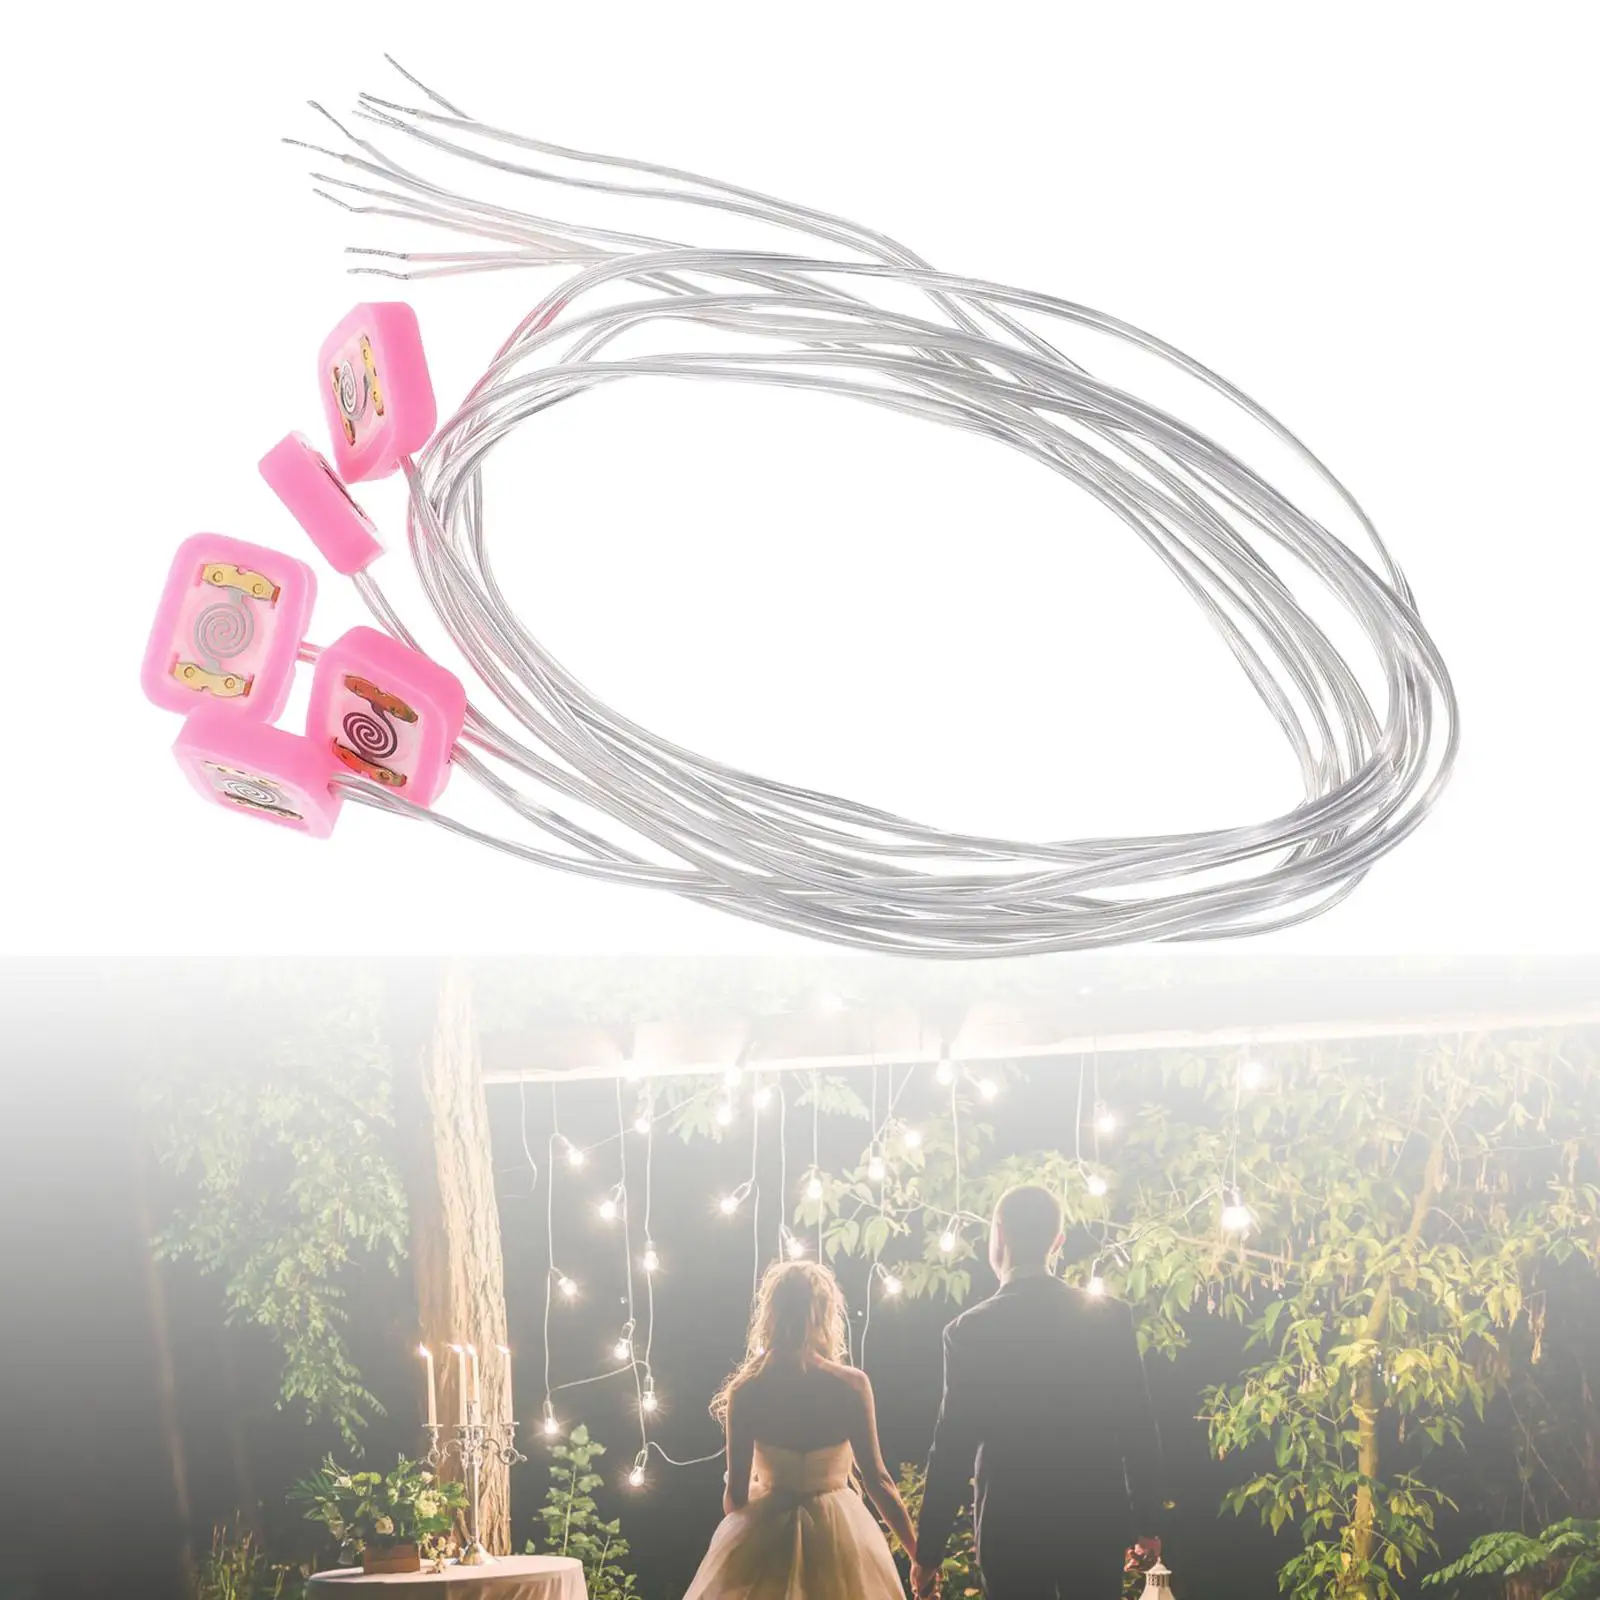 5 Pieces 50cm Extension Cords Electrical Wires Copper Wedding Fuse Party